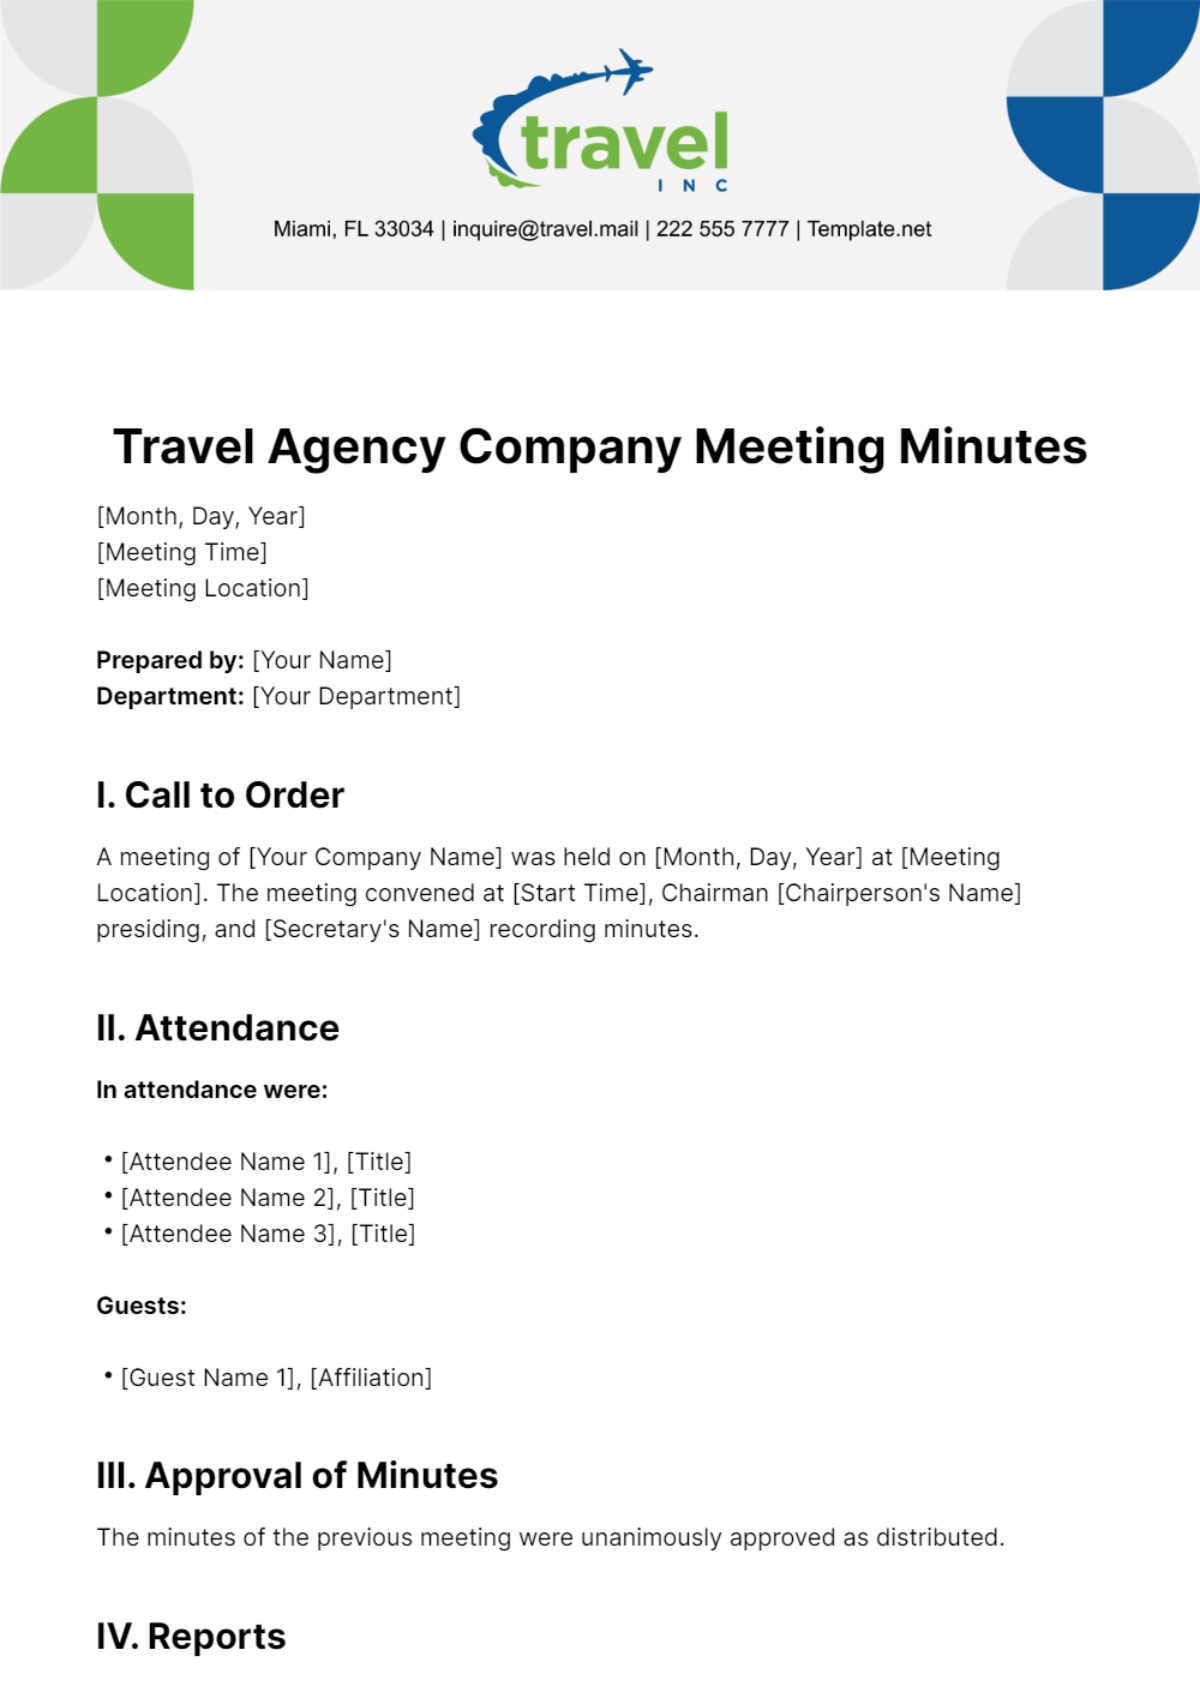 Travel Agency Company Meeting Minutes Template